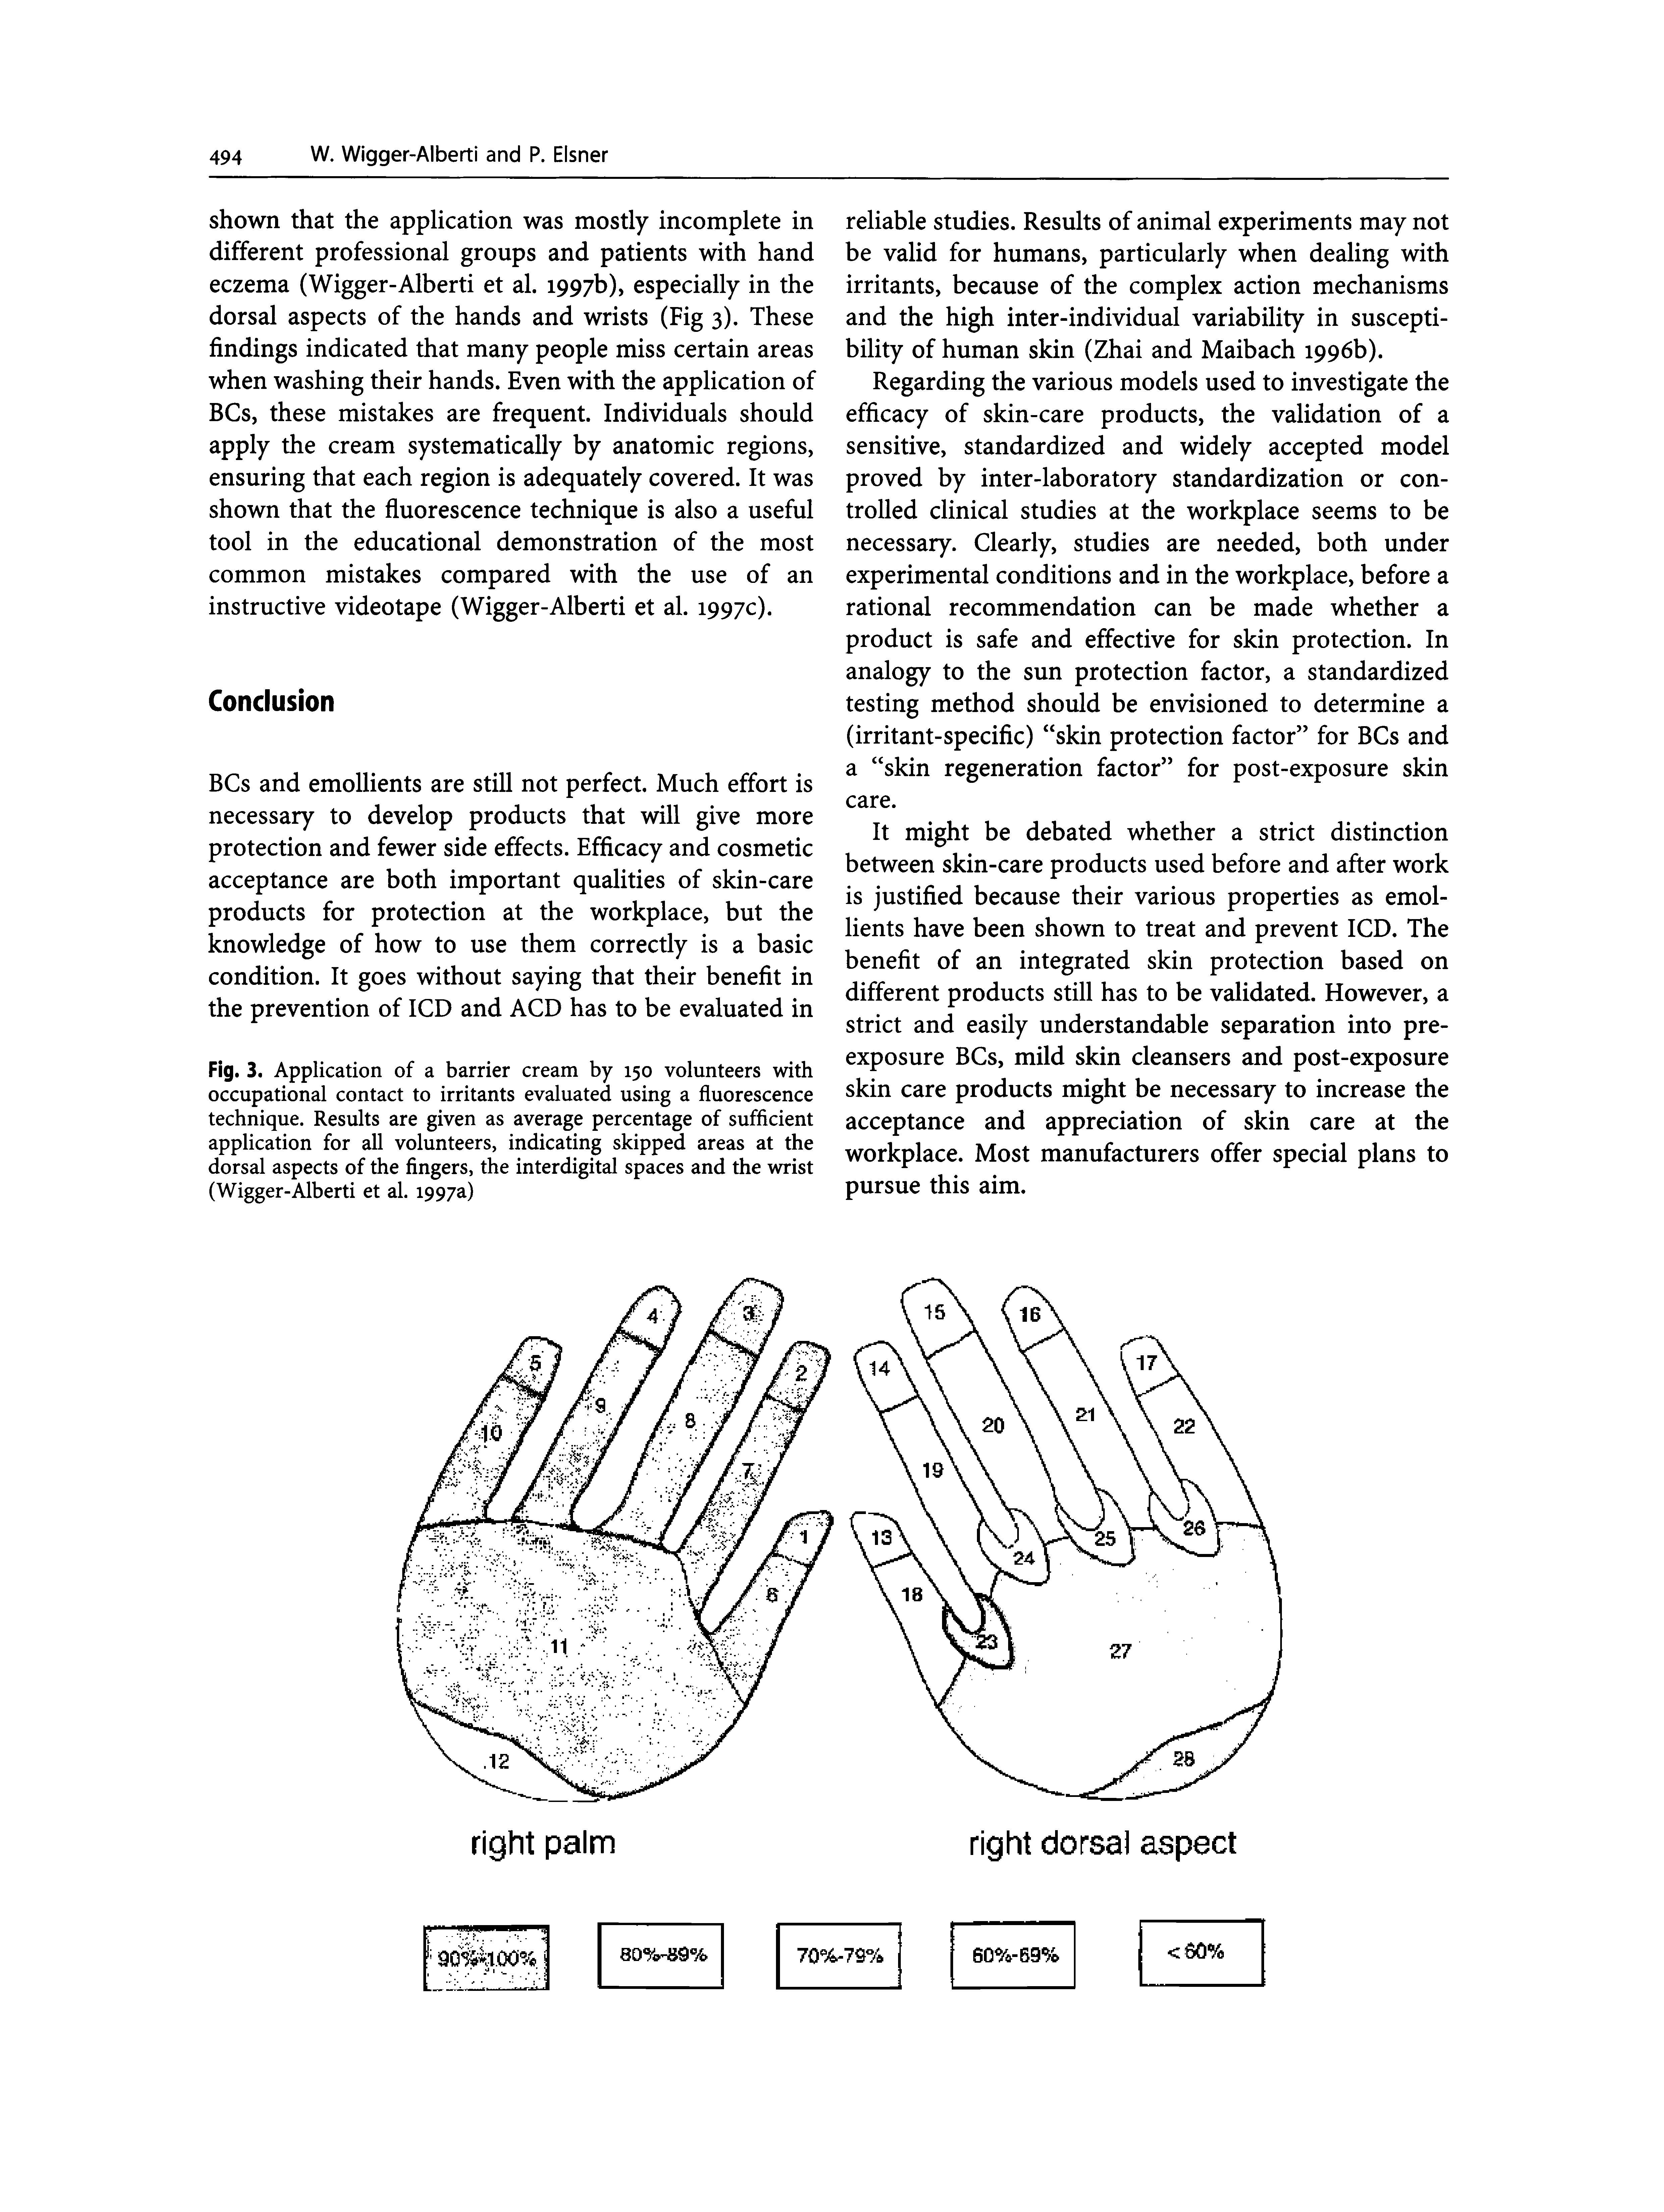 Fig. 3. Application of a barrier cream by 150 volunteers with occupational contact to irritants evaluated using a fluorescence technique. Results are given as average percentage of sufficient application for all volunteers, indicating skipped areas at the dorsal aspects of the fingers, the interdigital spaces and the wrist (Wigger-Alberti et al. 1997a)...